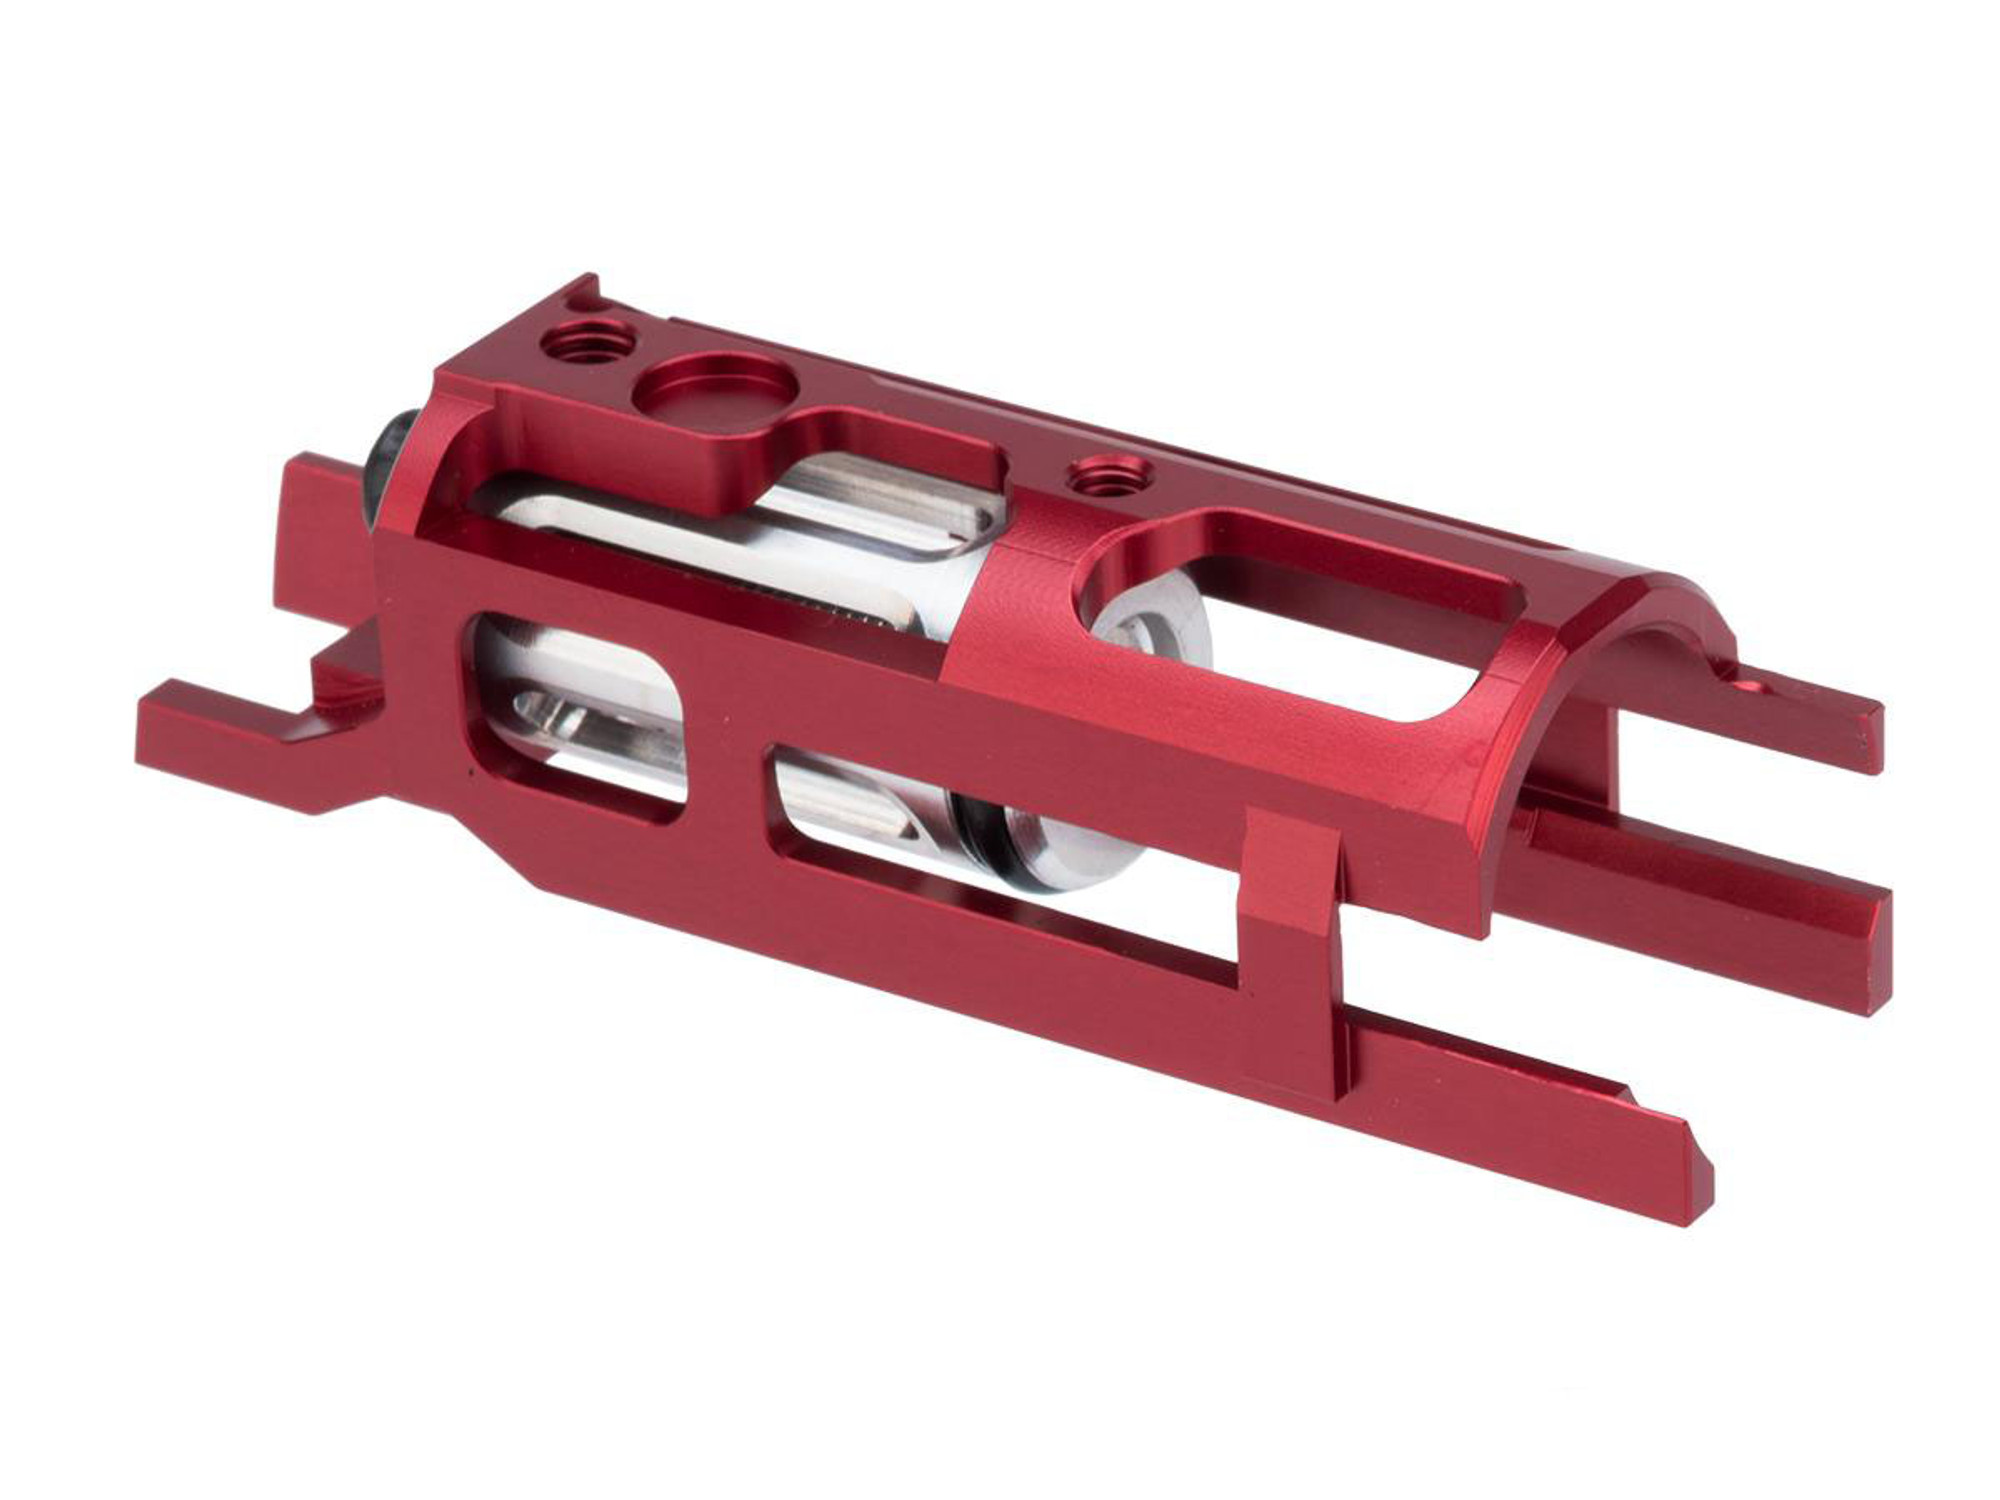 Airsoft Masterpiece EDGE Ultra Light Aluminum Blow Back Housing for Hi-CAPA Gas Airsoft Pistols (Color: Red)